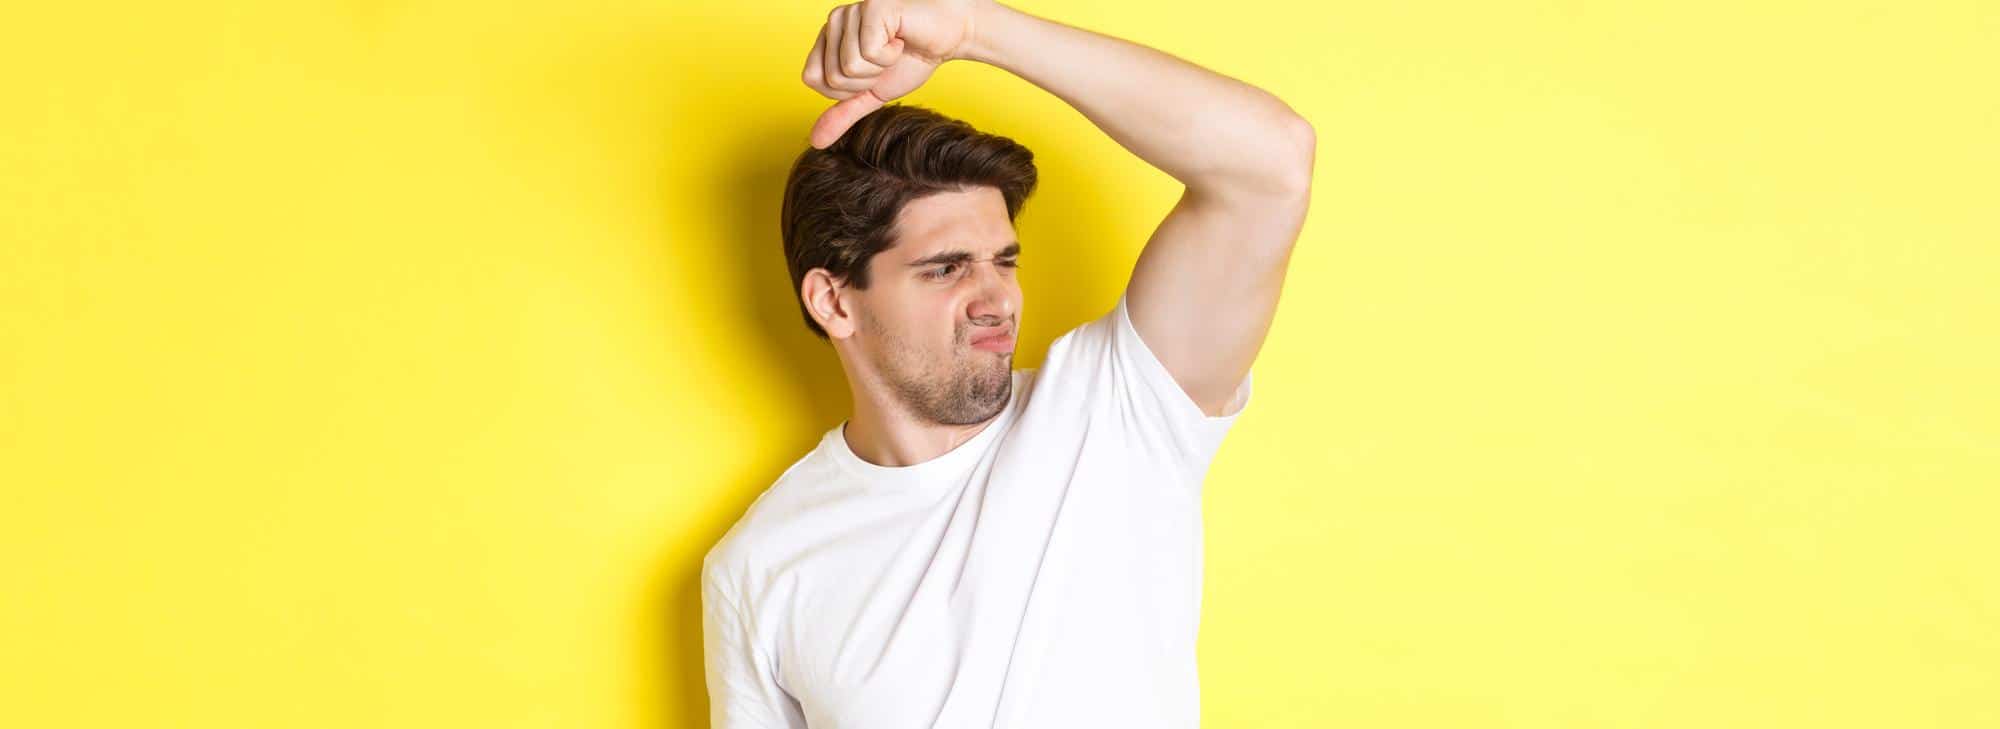 About Excessive Sweating: Causes, Symptoms Triggers and Prevention